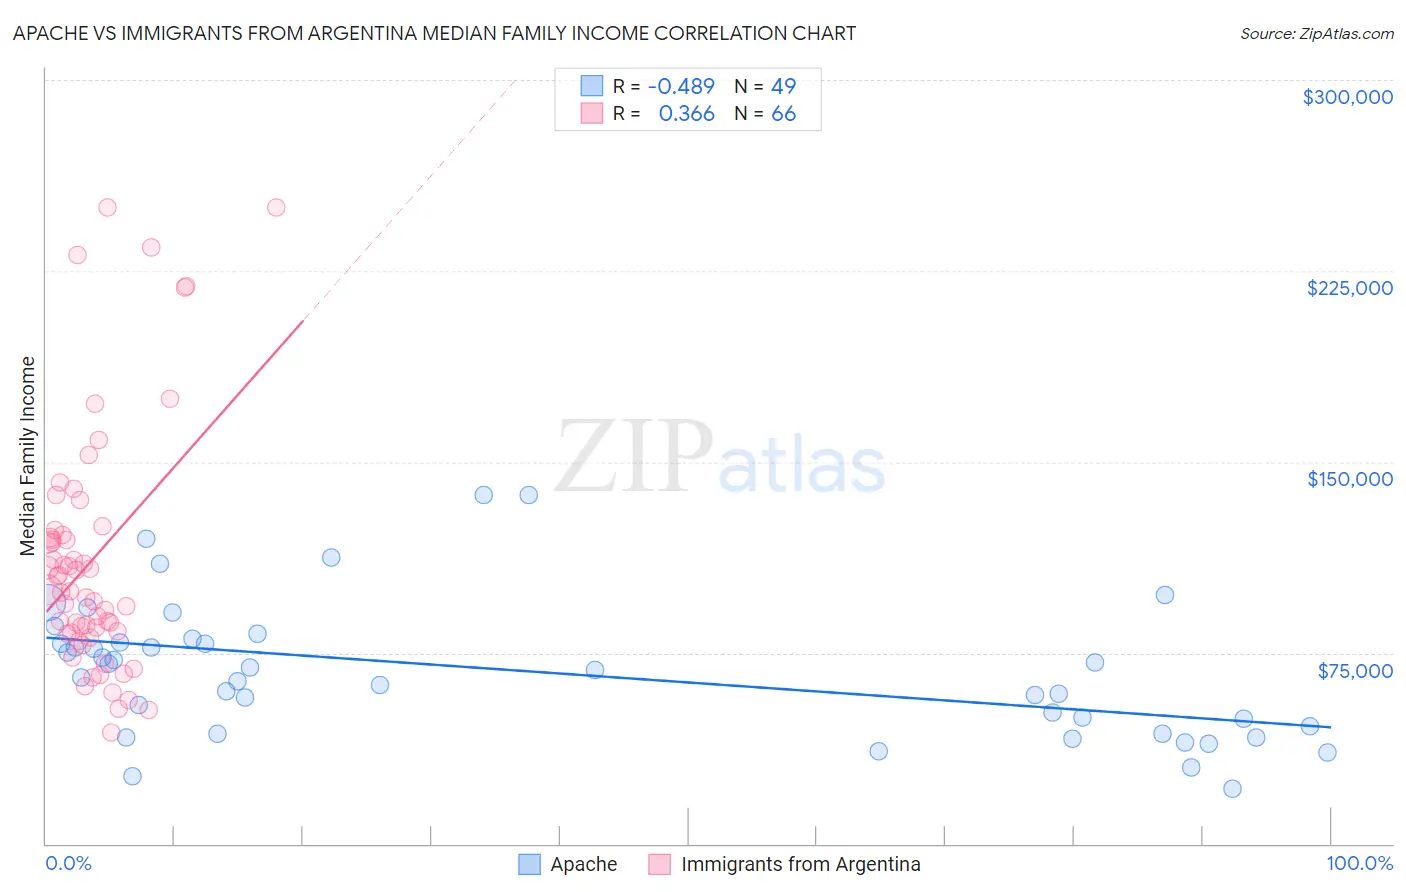 Apache vs Immigrants from Argentina Median Family Income